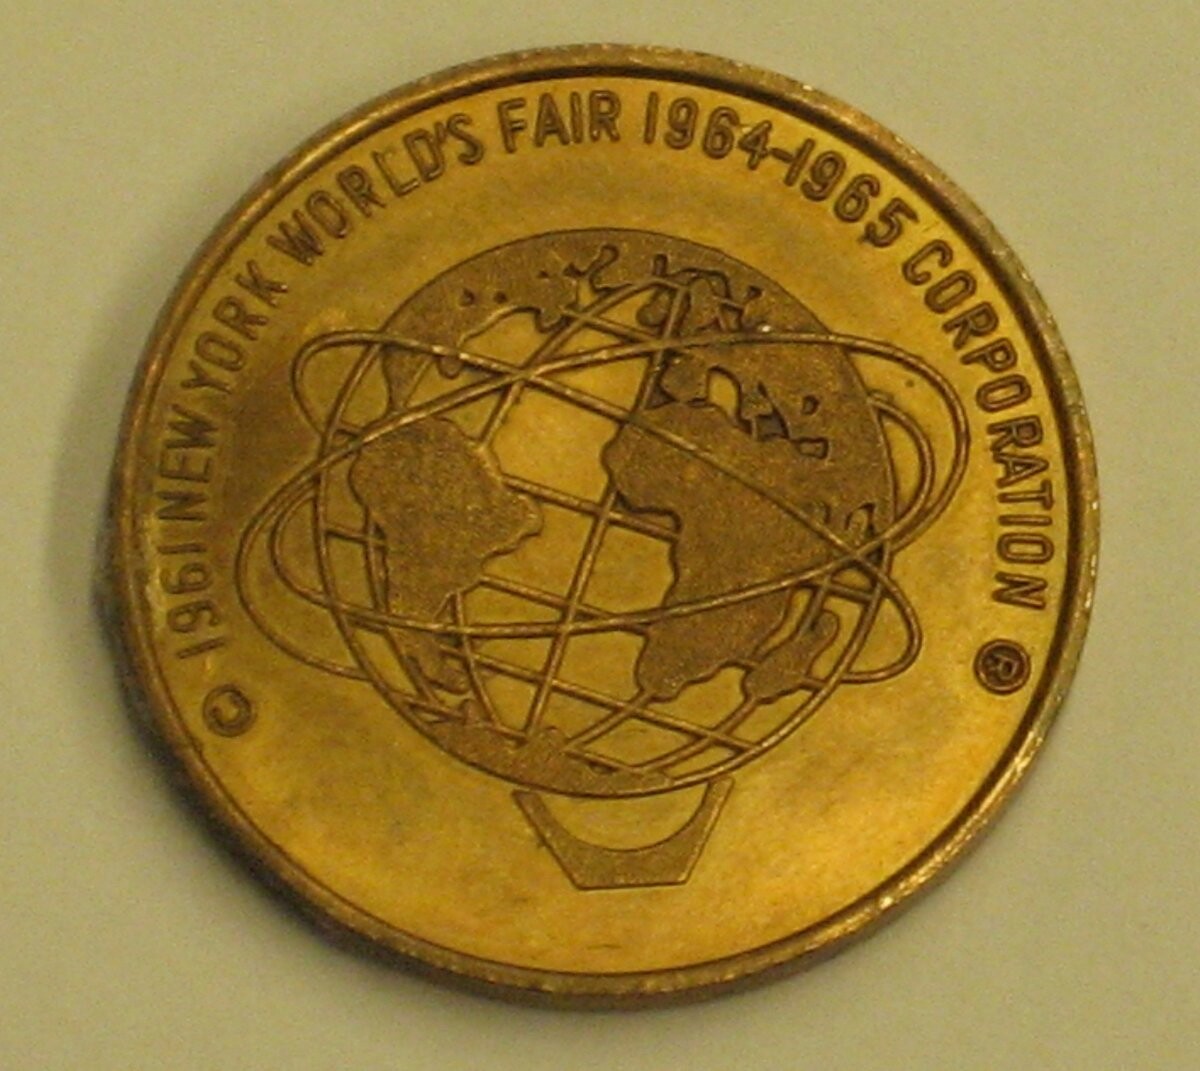 #ObjectSpotlight: Dating back to 1964, this @LIRR token from the #NYTMCollection was used for the 1964 World’s Fair. It features “Dashing Dan,” the #LIRR’s Route of the Dashing Commuter mascot on one side and the World’s Fair Unisphere on the reverse.